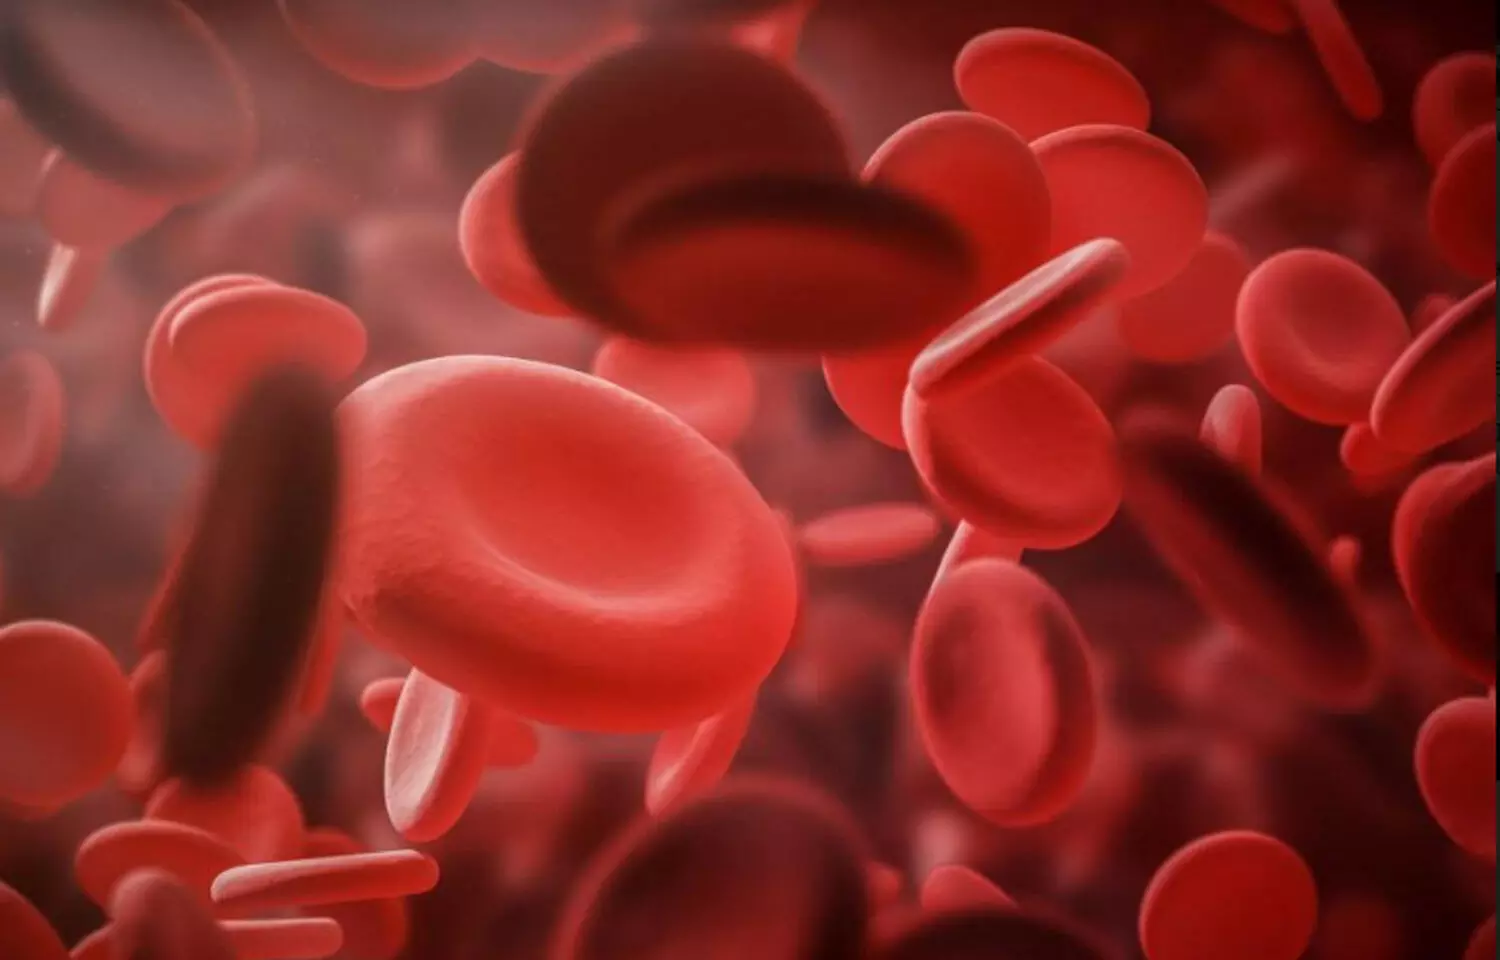 Covid-19 patients with existing Hemoglobinopathy may have more complications